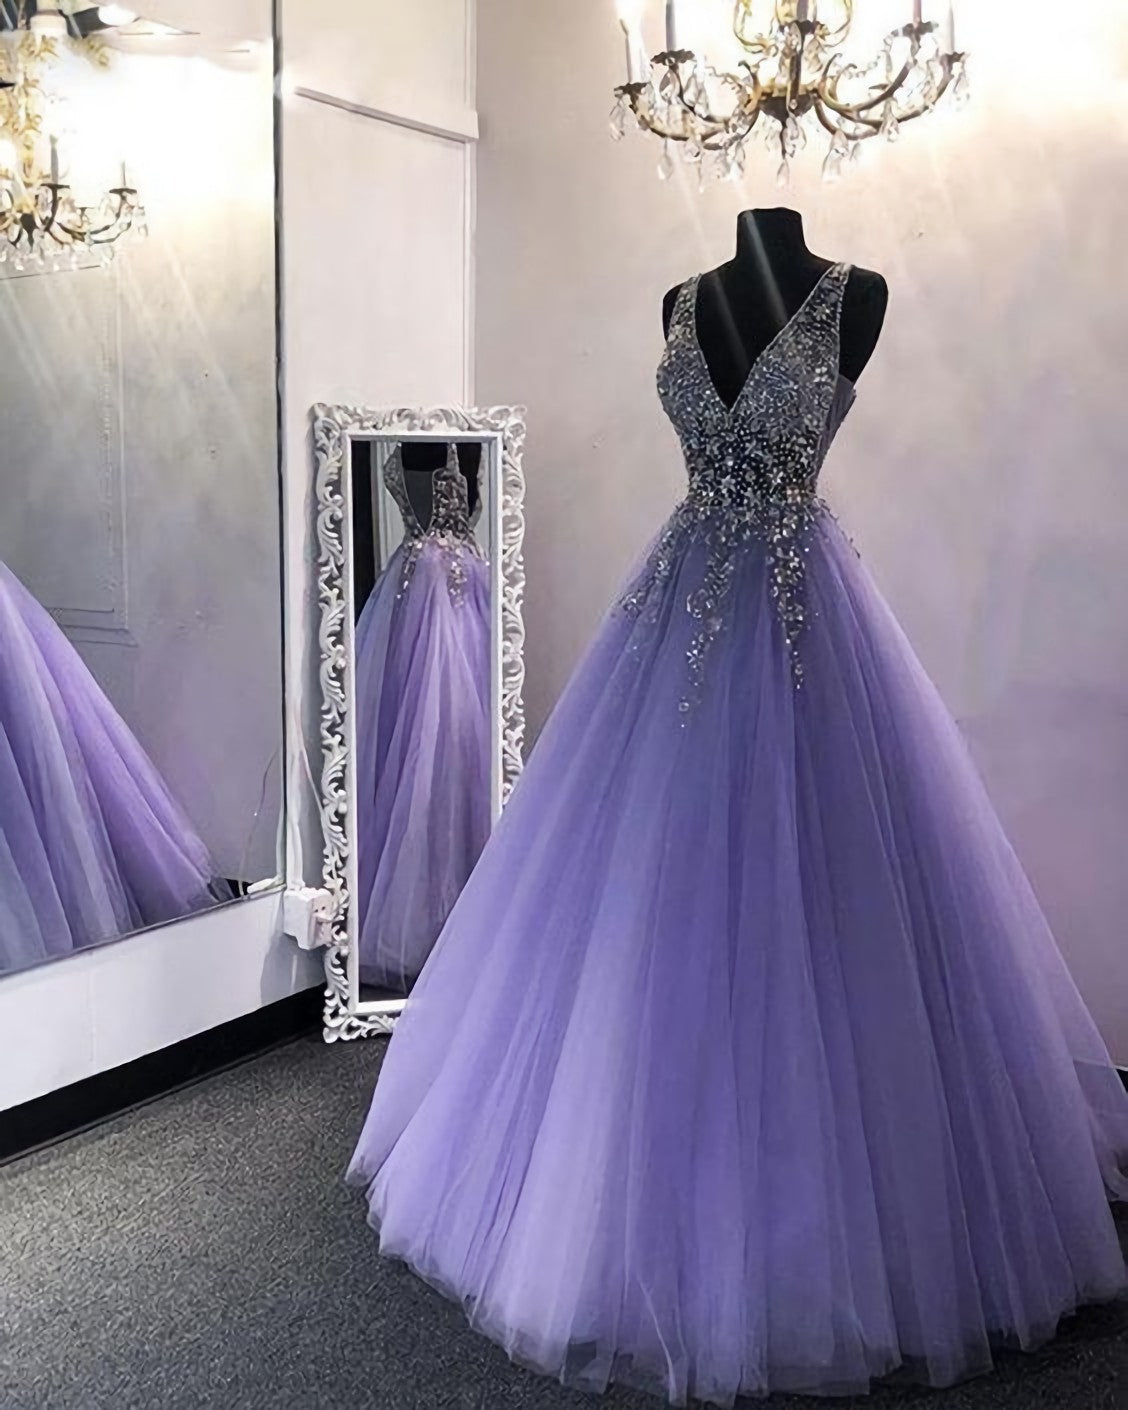 Amazing V Neck Beading Lavender Corset Ball Gown Puffy Girls Sweet Quinceanera Dresses, Corset Prom Gown outfits, Short Black Dress